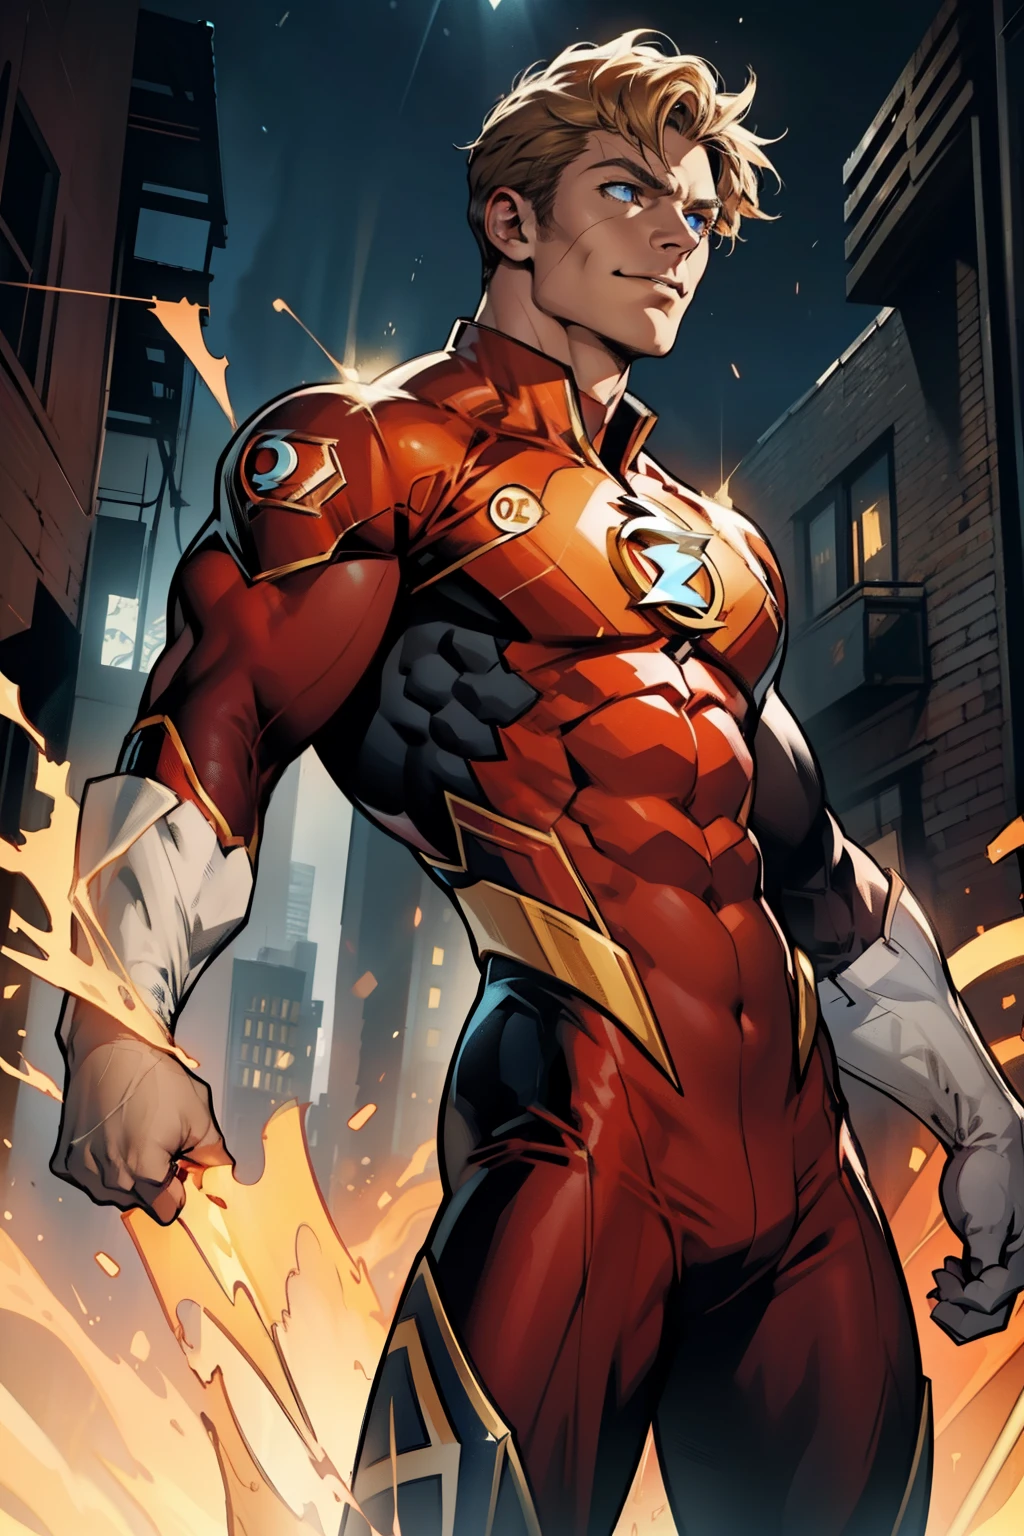 The Flash, clad in his iconic red suit with a golden lightning bolt emblem, stands before us with a hopeful expression gracing his chiseled features. In his hand, the distinctive blue lantern ring gleams, its power radiating palpable energy. His piercing blue eyes, filled with determination and compassion, seem to burn with the very essence of hope itself. The detailed texture of his skin, as if etched with intricate lines, enhances the sense of depth and realism in this high-resolution character portrait. (Masterpiece: 1.2)